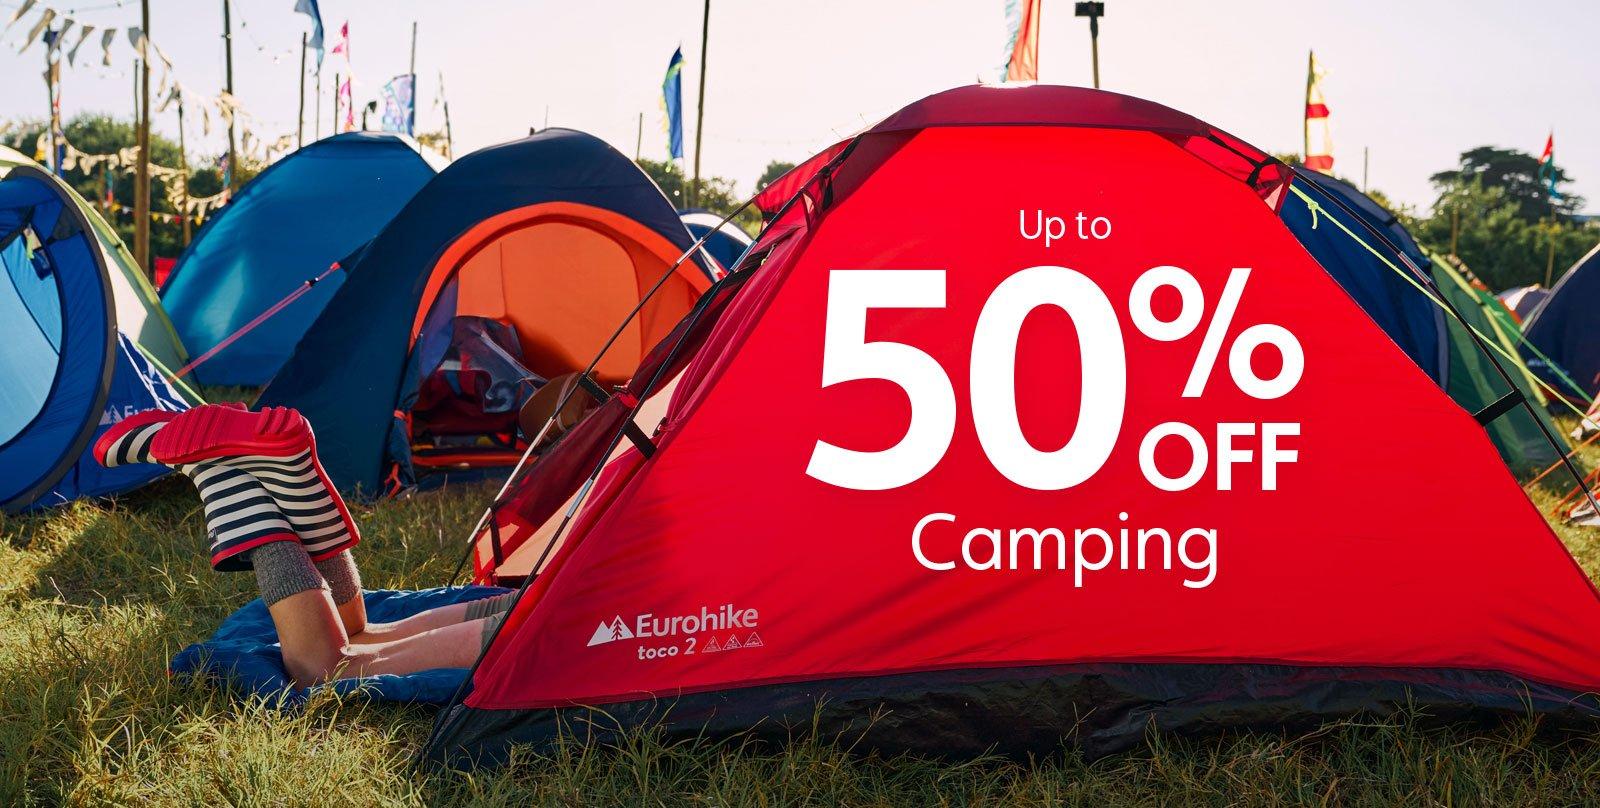 Up to 50% OFF Camping